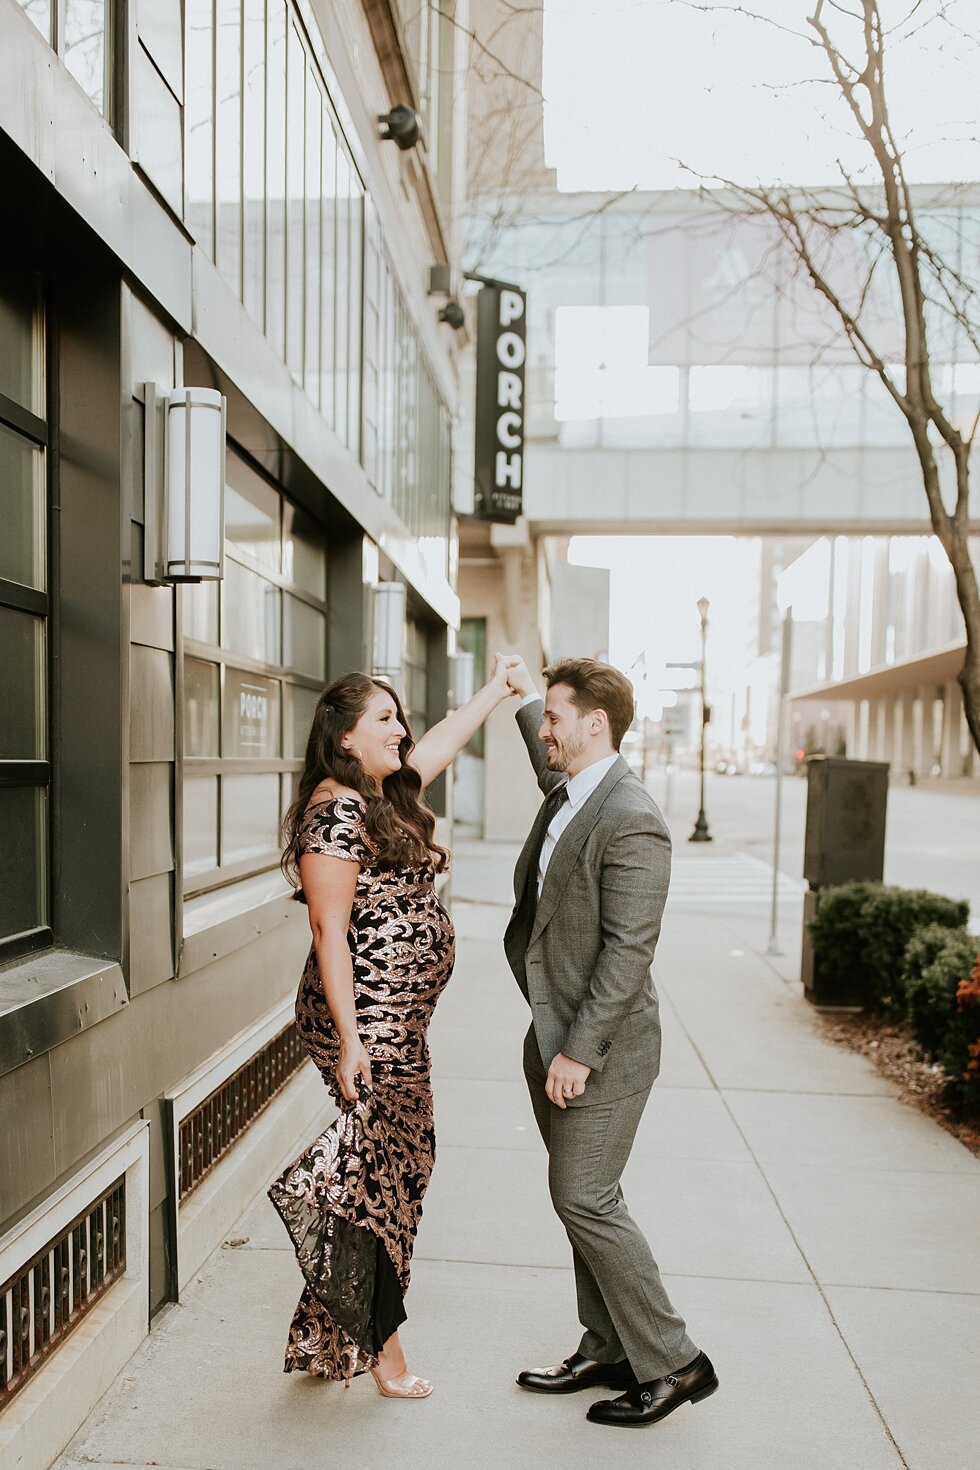  Dancing into parenthood wearing the last formal attire they may be in for quite some time as they turn from a family of two to a family of three. #maternitygoals #maternityphotographer #babybump #kentuckyphotographer #fancymaternitysession #modernma